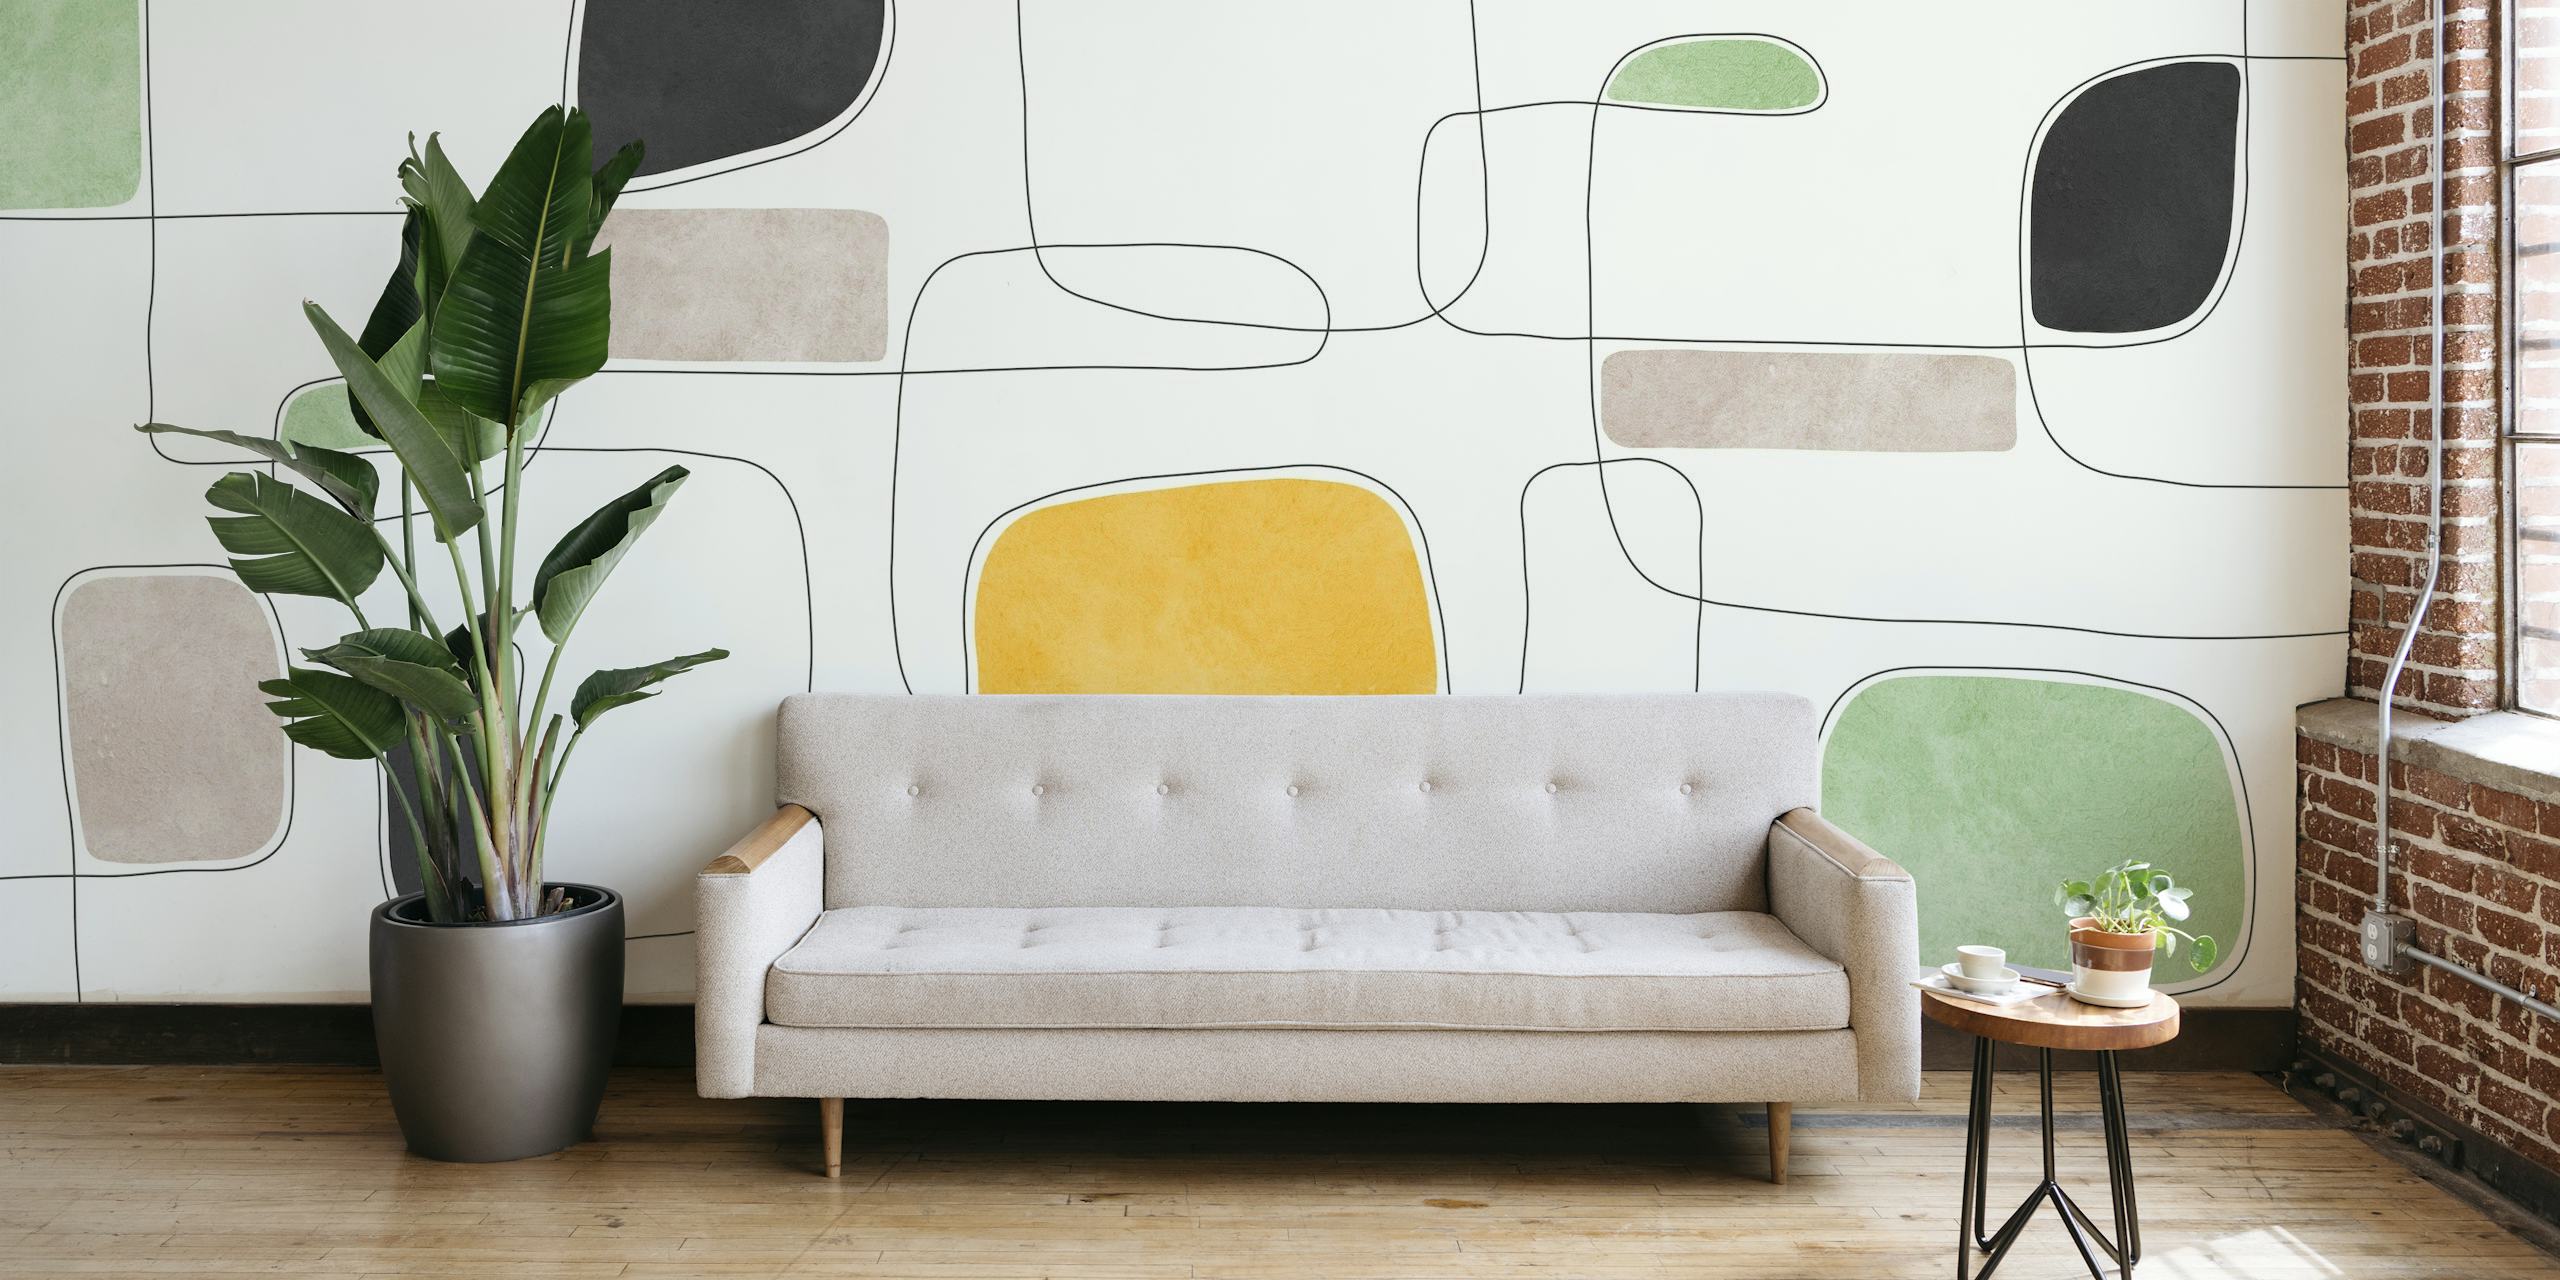 Abstract wall mural featuring hand-drawn lines and brushstrokes in neutral and bold colors